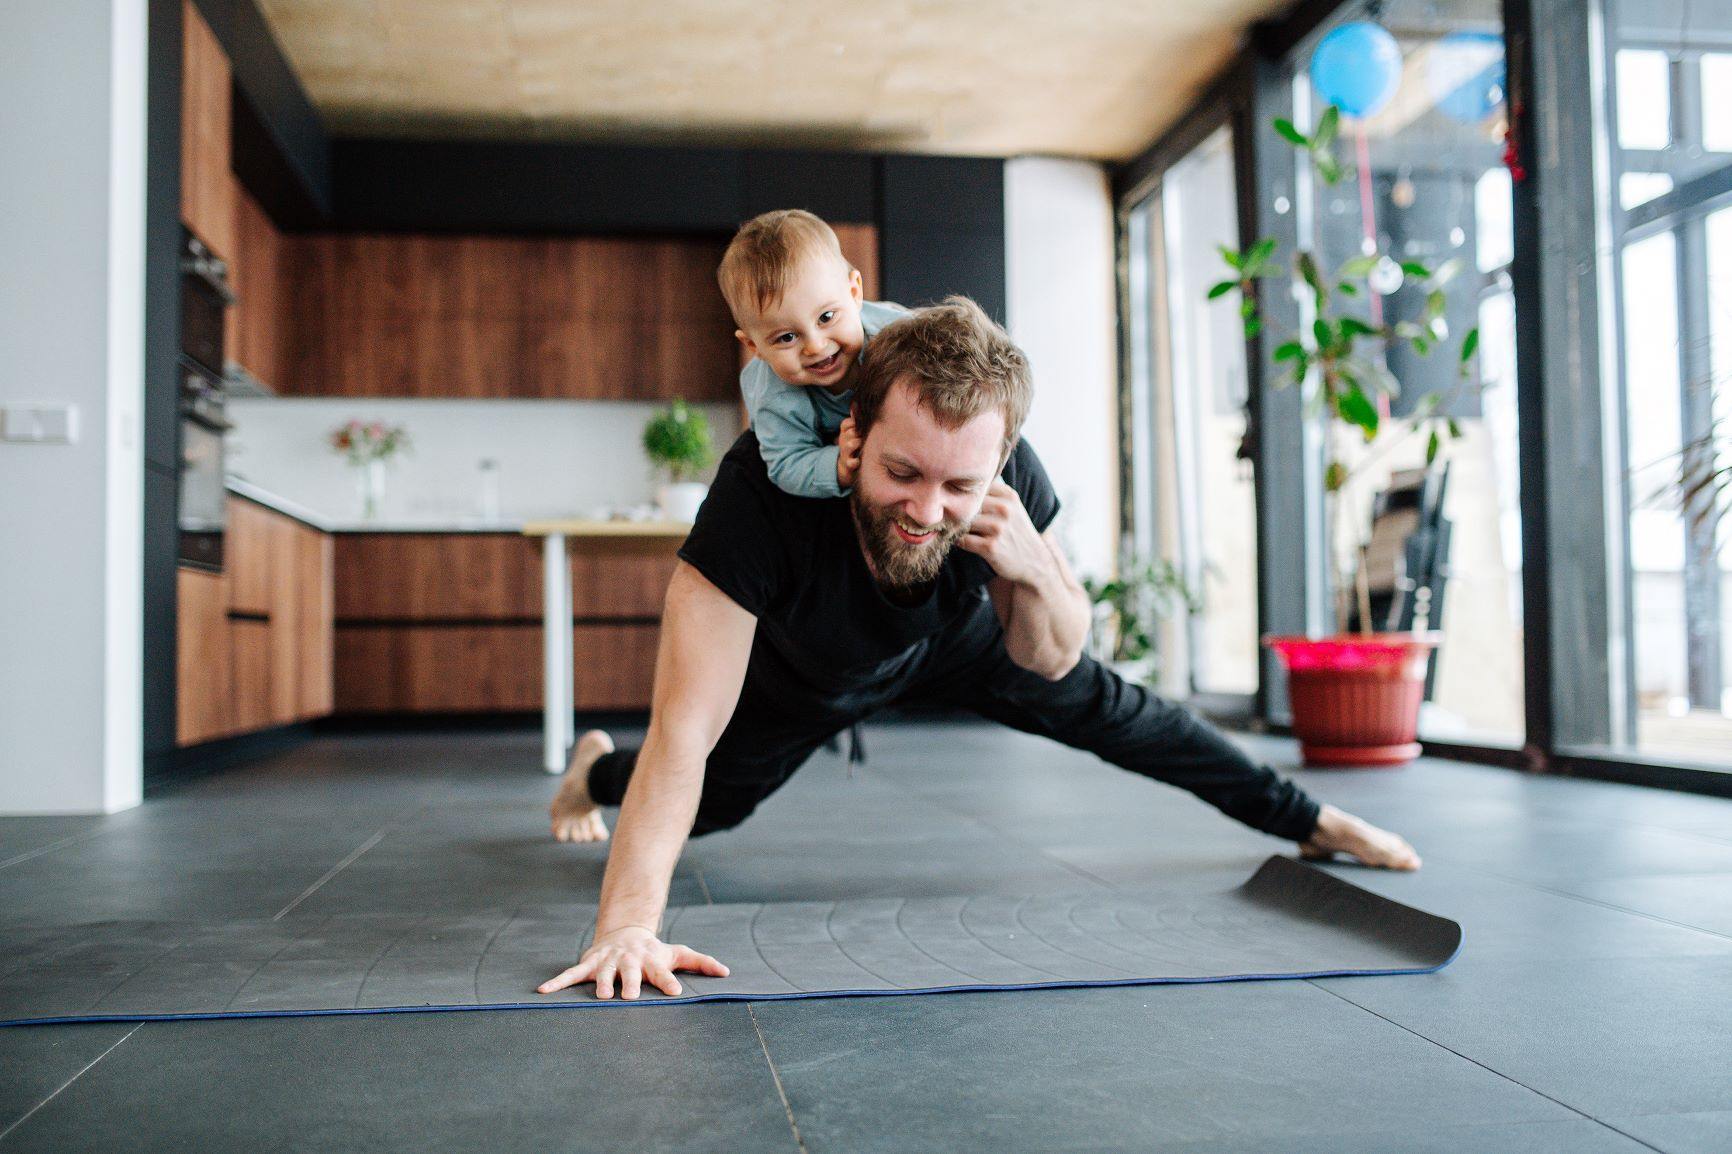 Man doing one arm push up with small child on his back